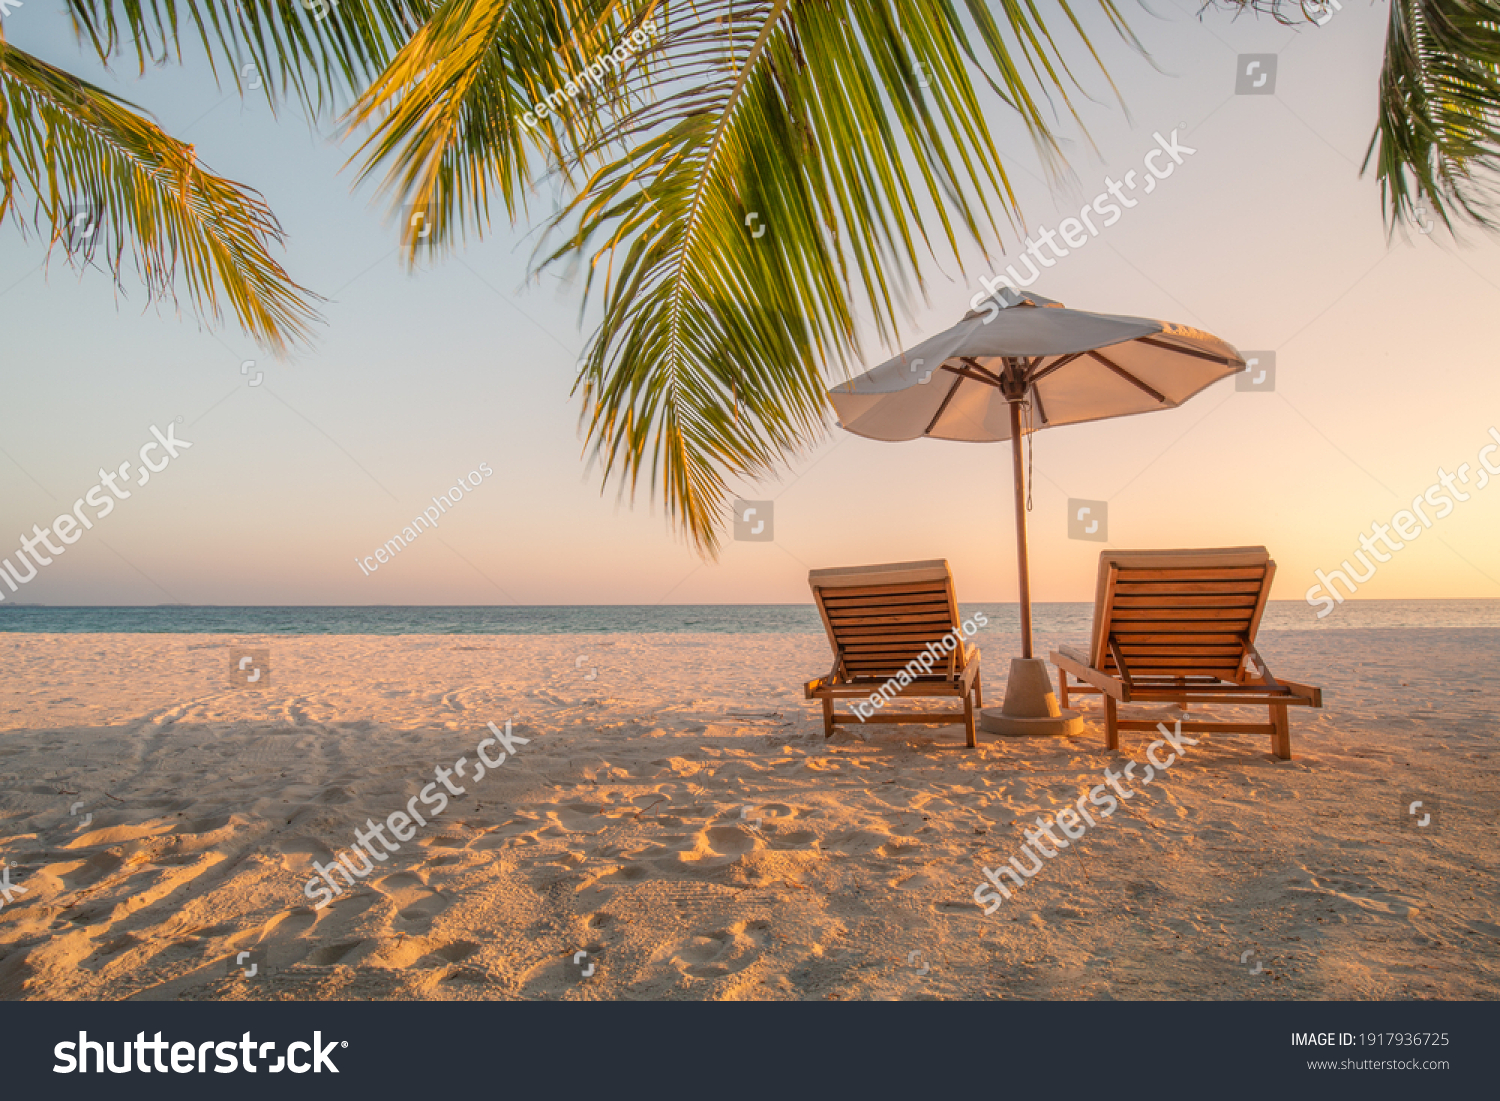 Beautiful beach. Chairs on the sandy beach near the sea. Summer holiday and vacation concept for tourism. Inspirational tropical landscape. Tranquil scenery, relaxing beach, tropical landscape design #1917936725